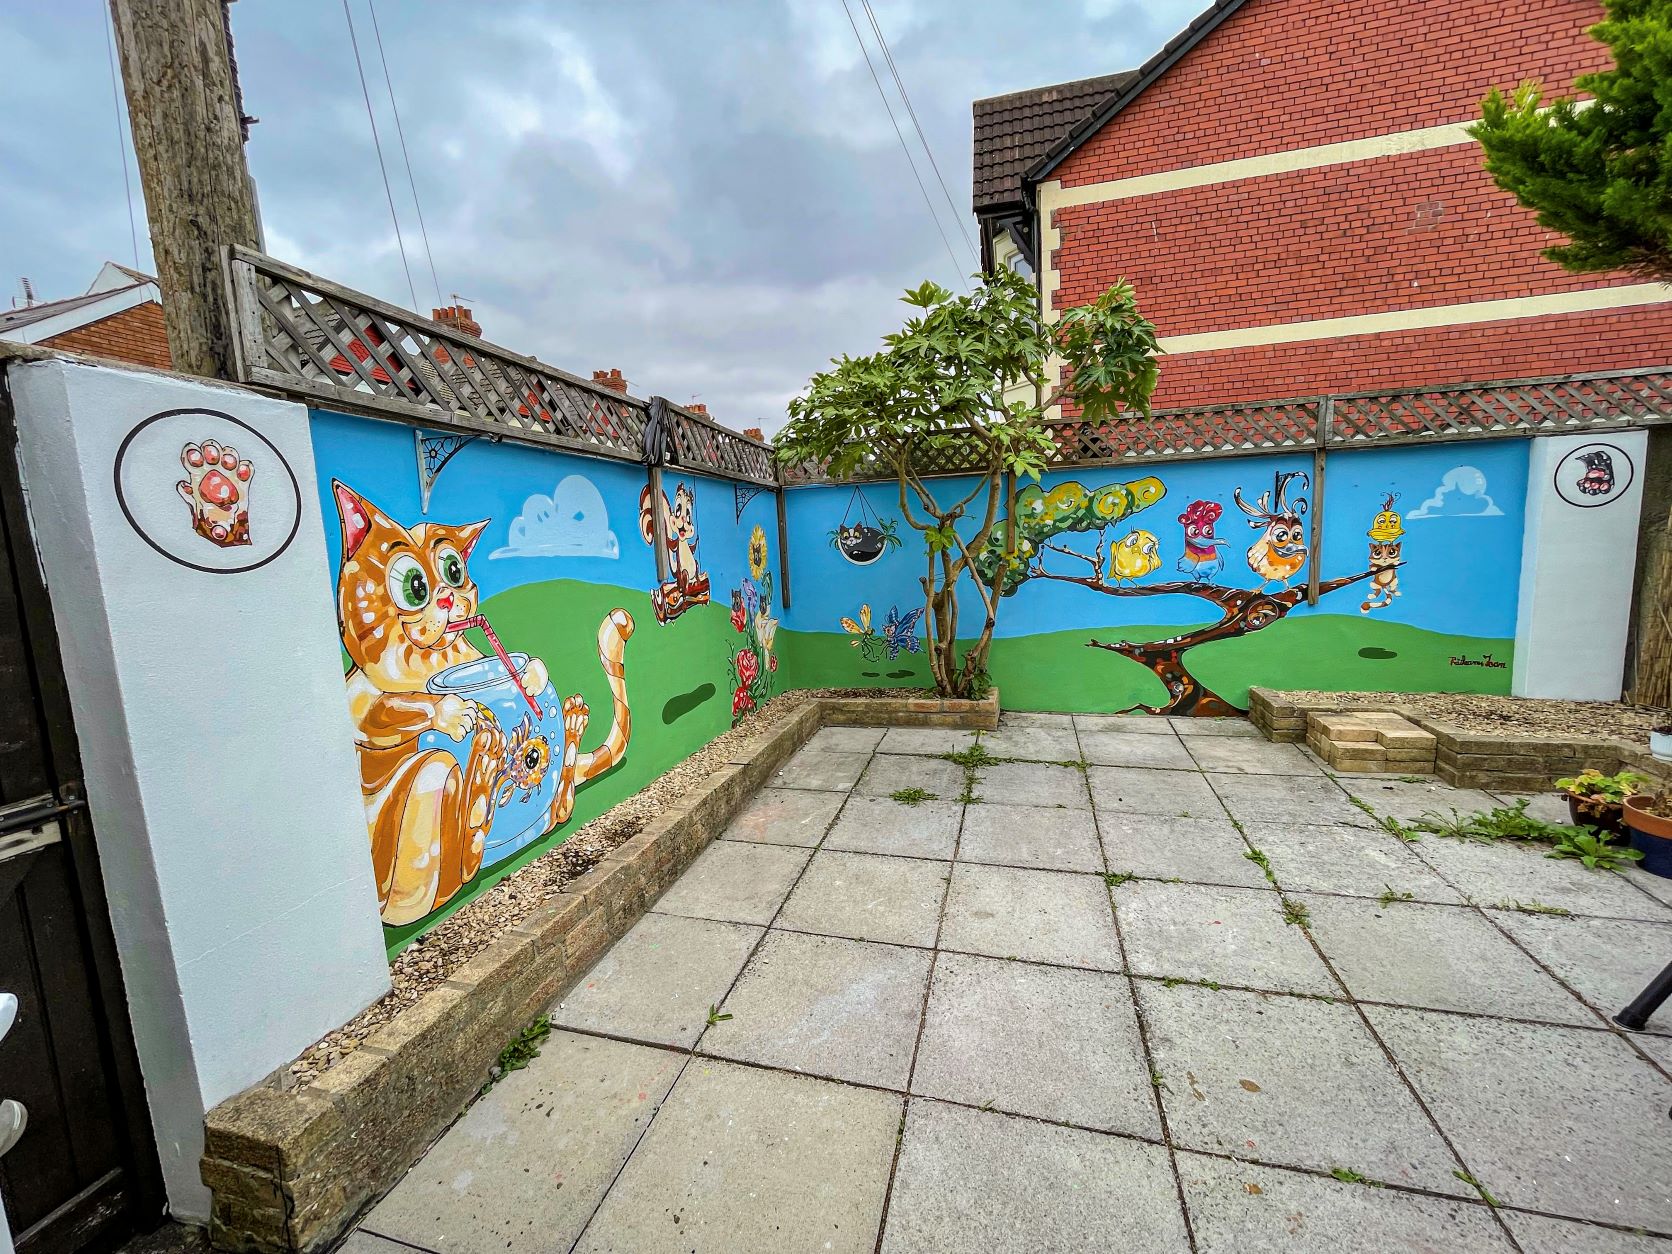 ‘HAPPY GARDEN’ MURAL OUTDOOR ARTWORK - Innovate Trust approached me to develop a mural for a 15m-square garden space – where people living in adjacent supported accommodation could have an input into the themes of the work. The individuals shared their love of cats and birds, and I added a few touches of my own to create a bright, colourful and cheerful scene. The response was very positive: the characters raise a smile even on rainy days and they have been given names! 